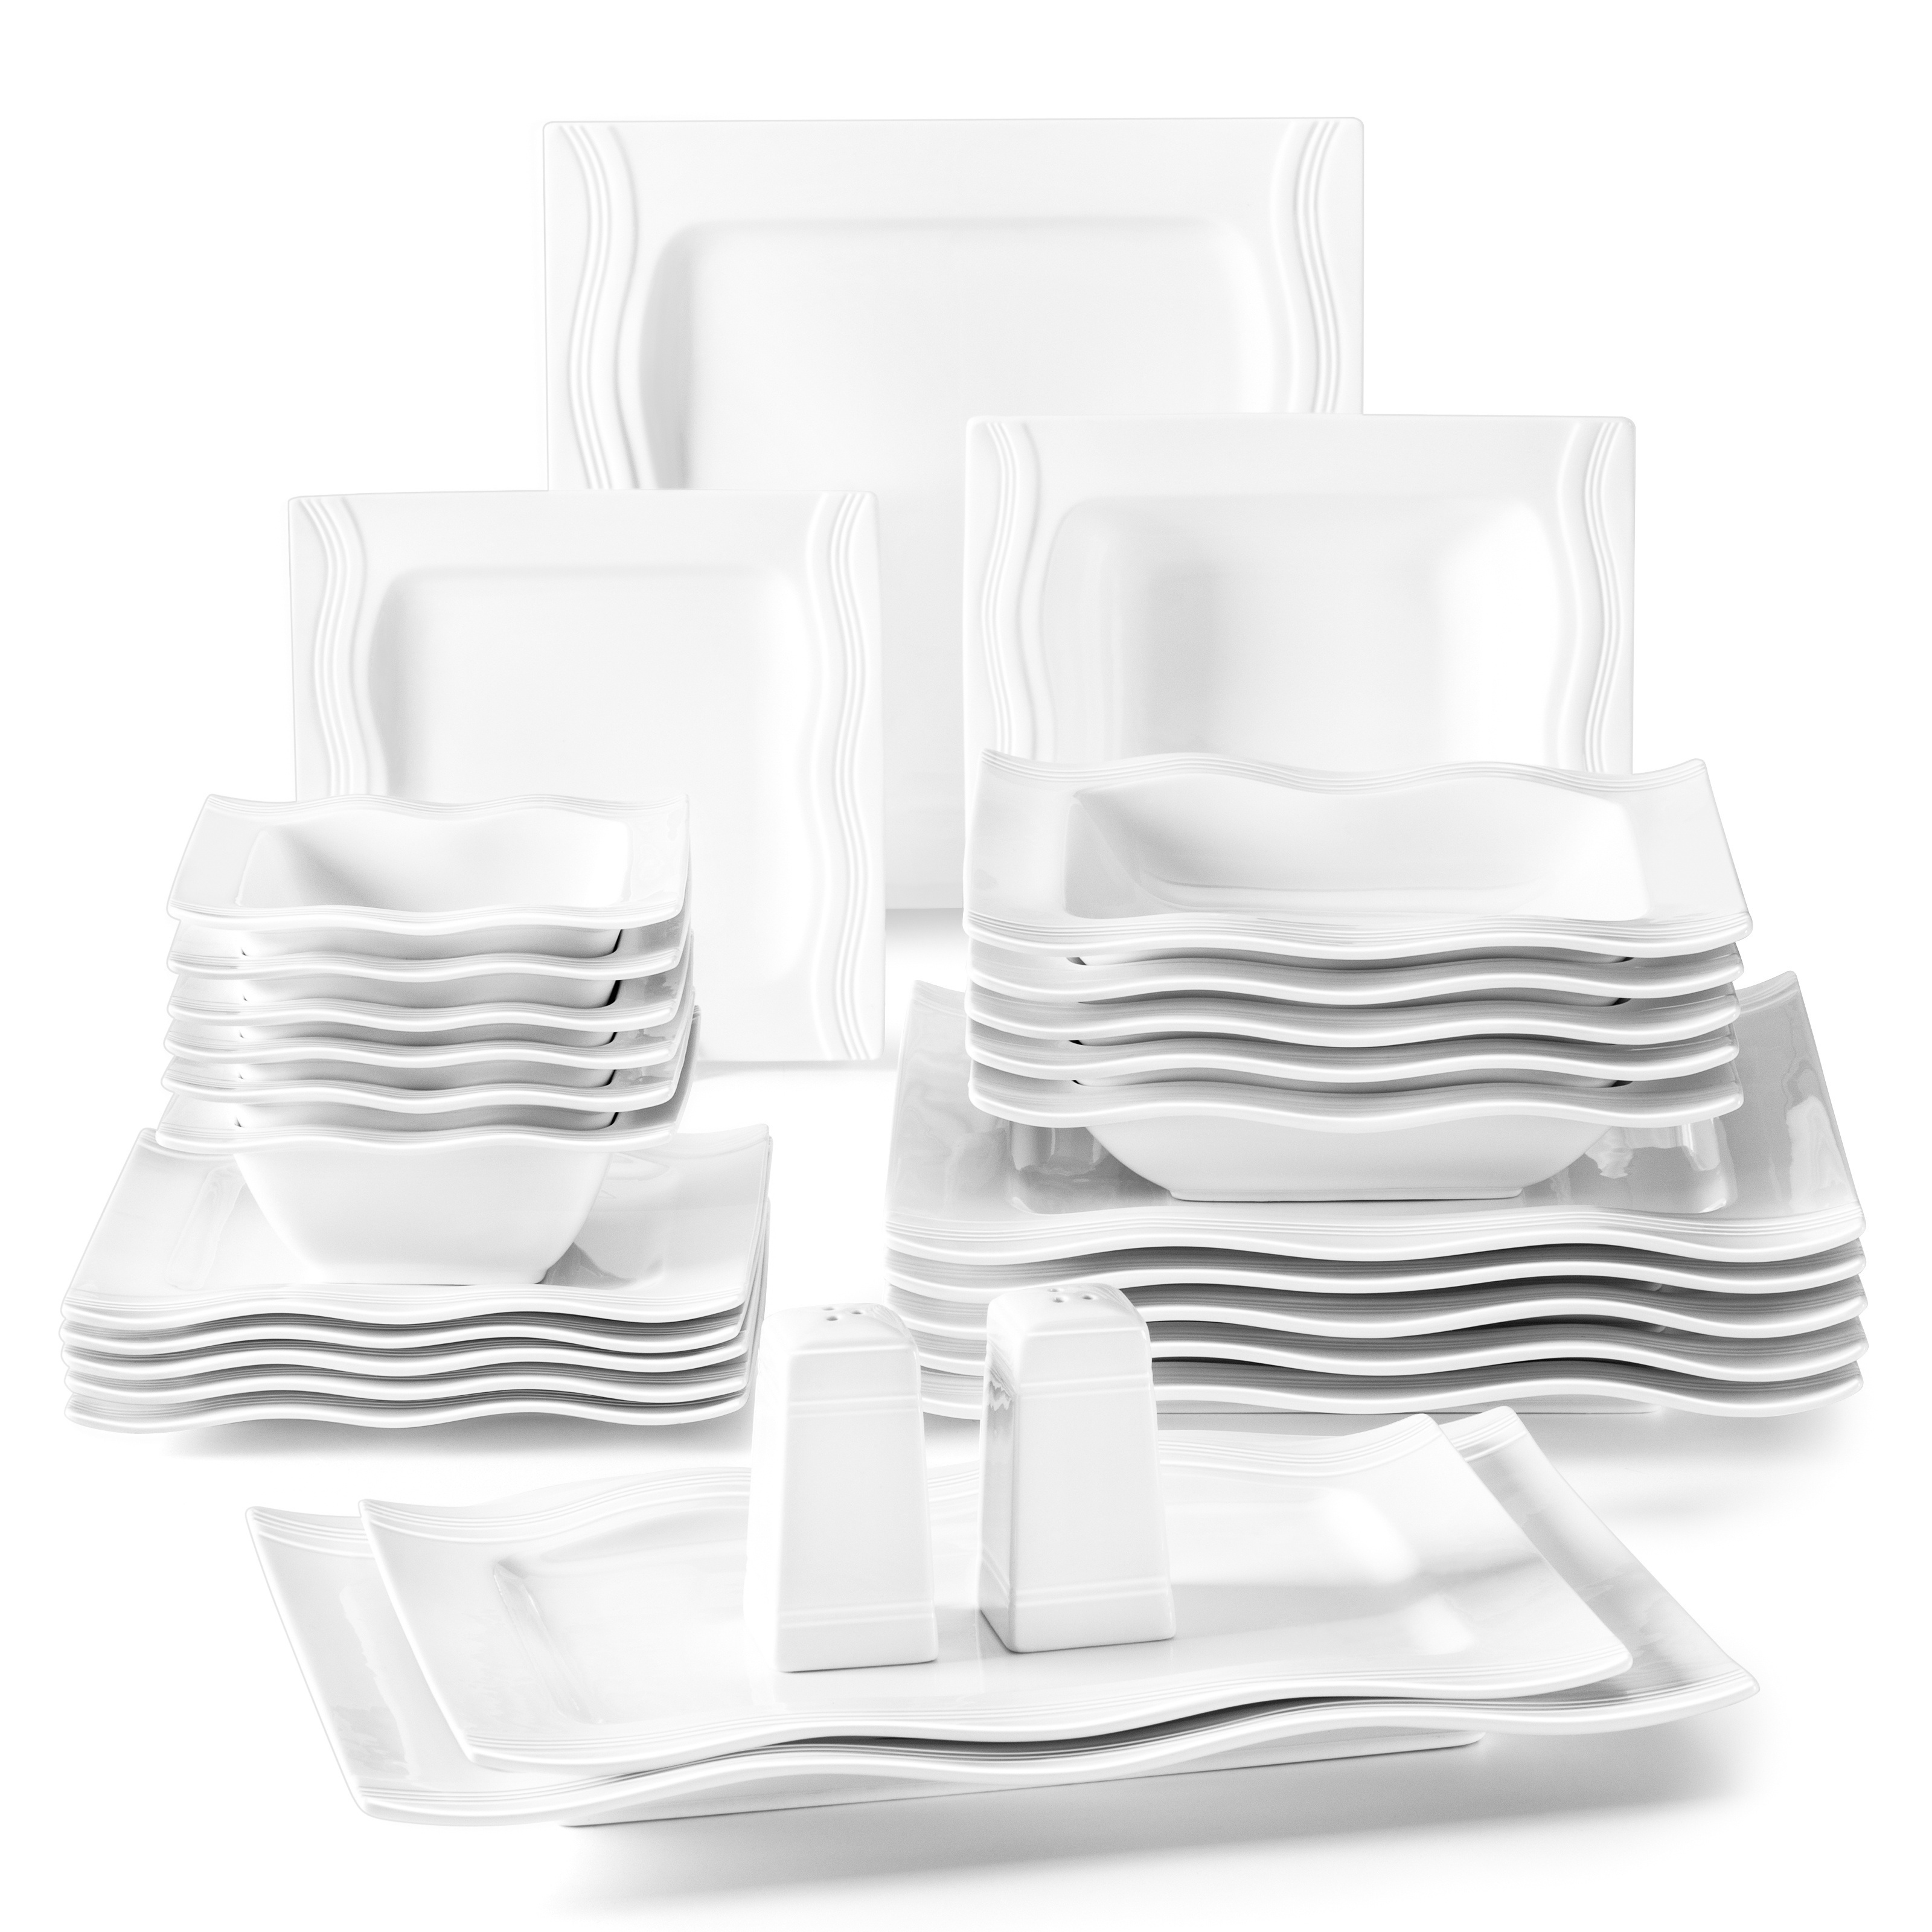 

28 Piece Dinnerware Set Ivory White Porcelain Tableware Bowls And Plates Set Service For 6